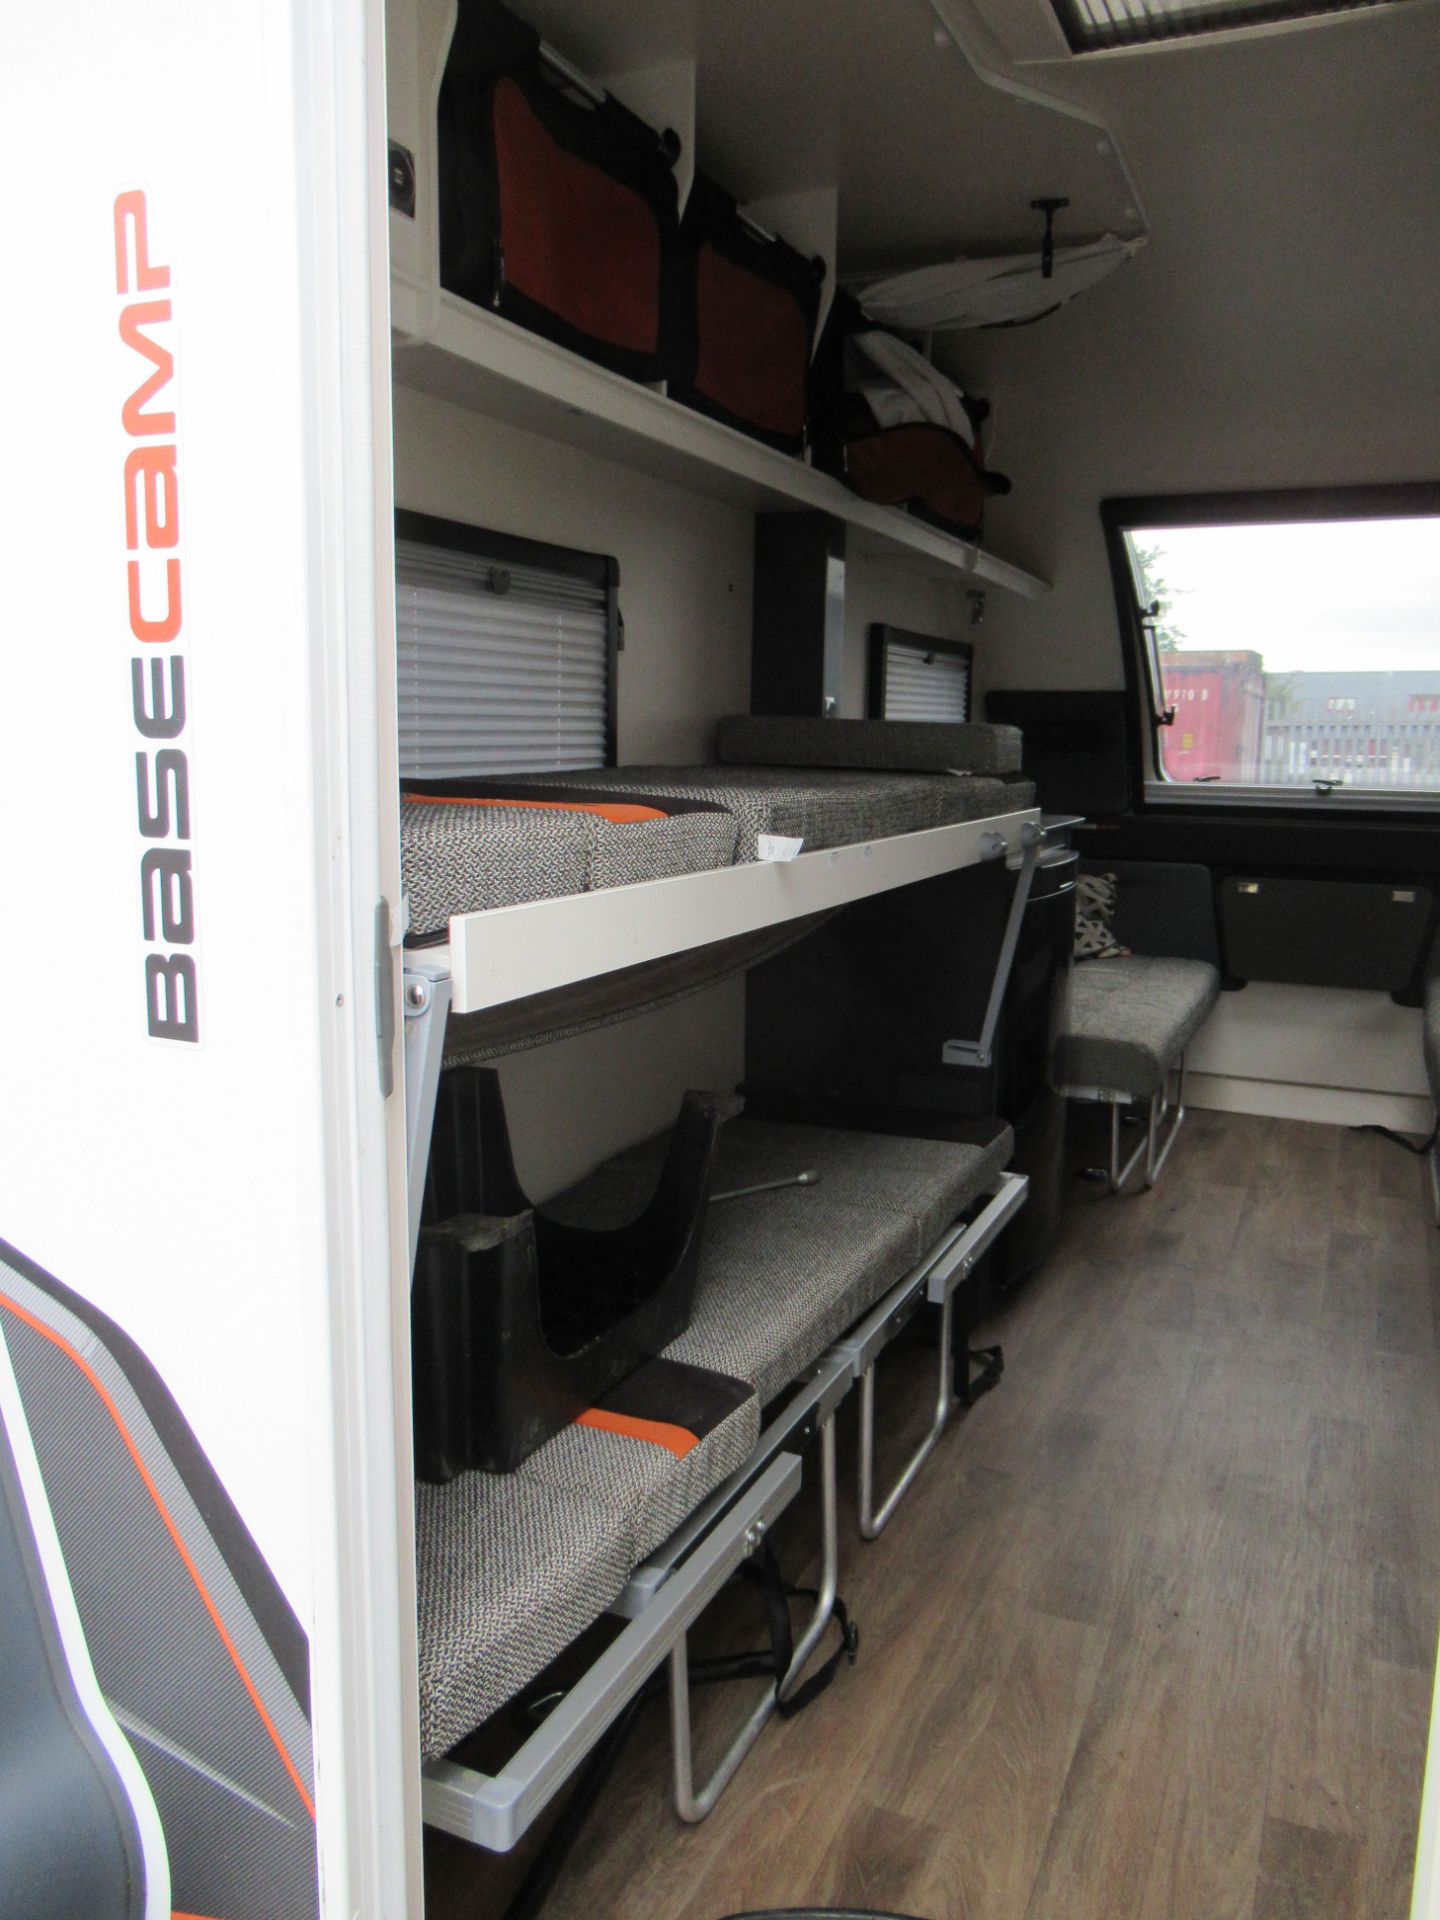 2021 Swift Basecamp 4 plus Touring Caravan with Motor Mover. - Image 24 of 55